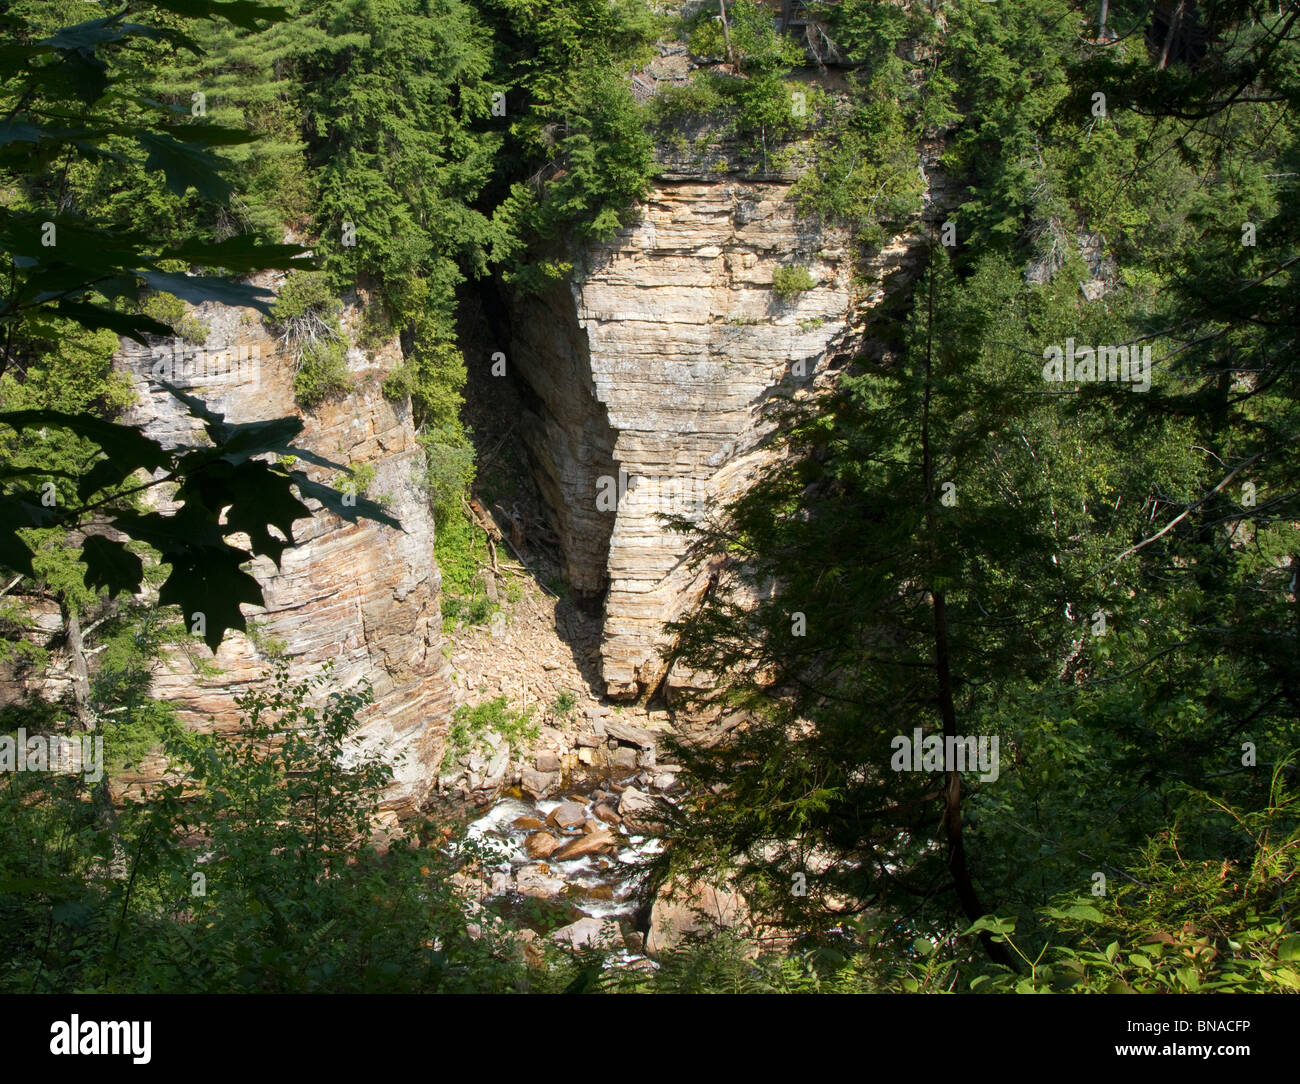 Elephant's head rock formation at Ausable Chasm. Shot from the rim of the chasm. Stock Photo